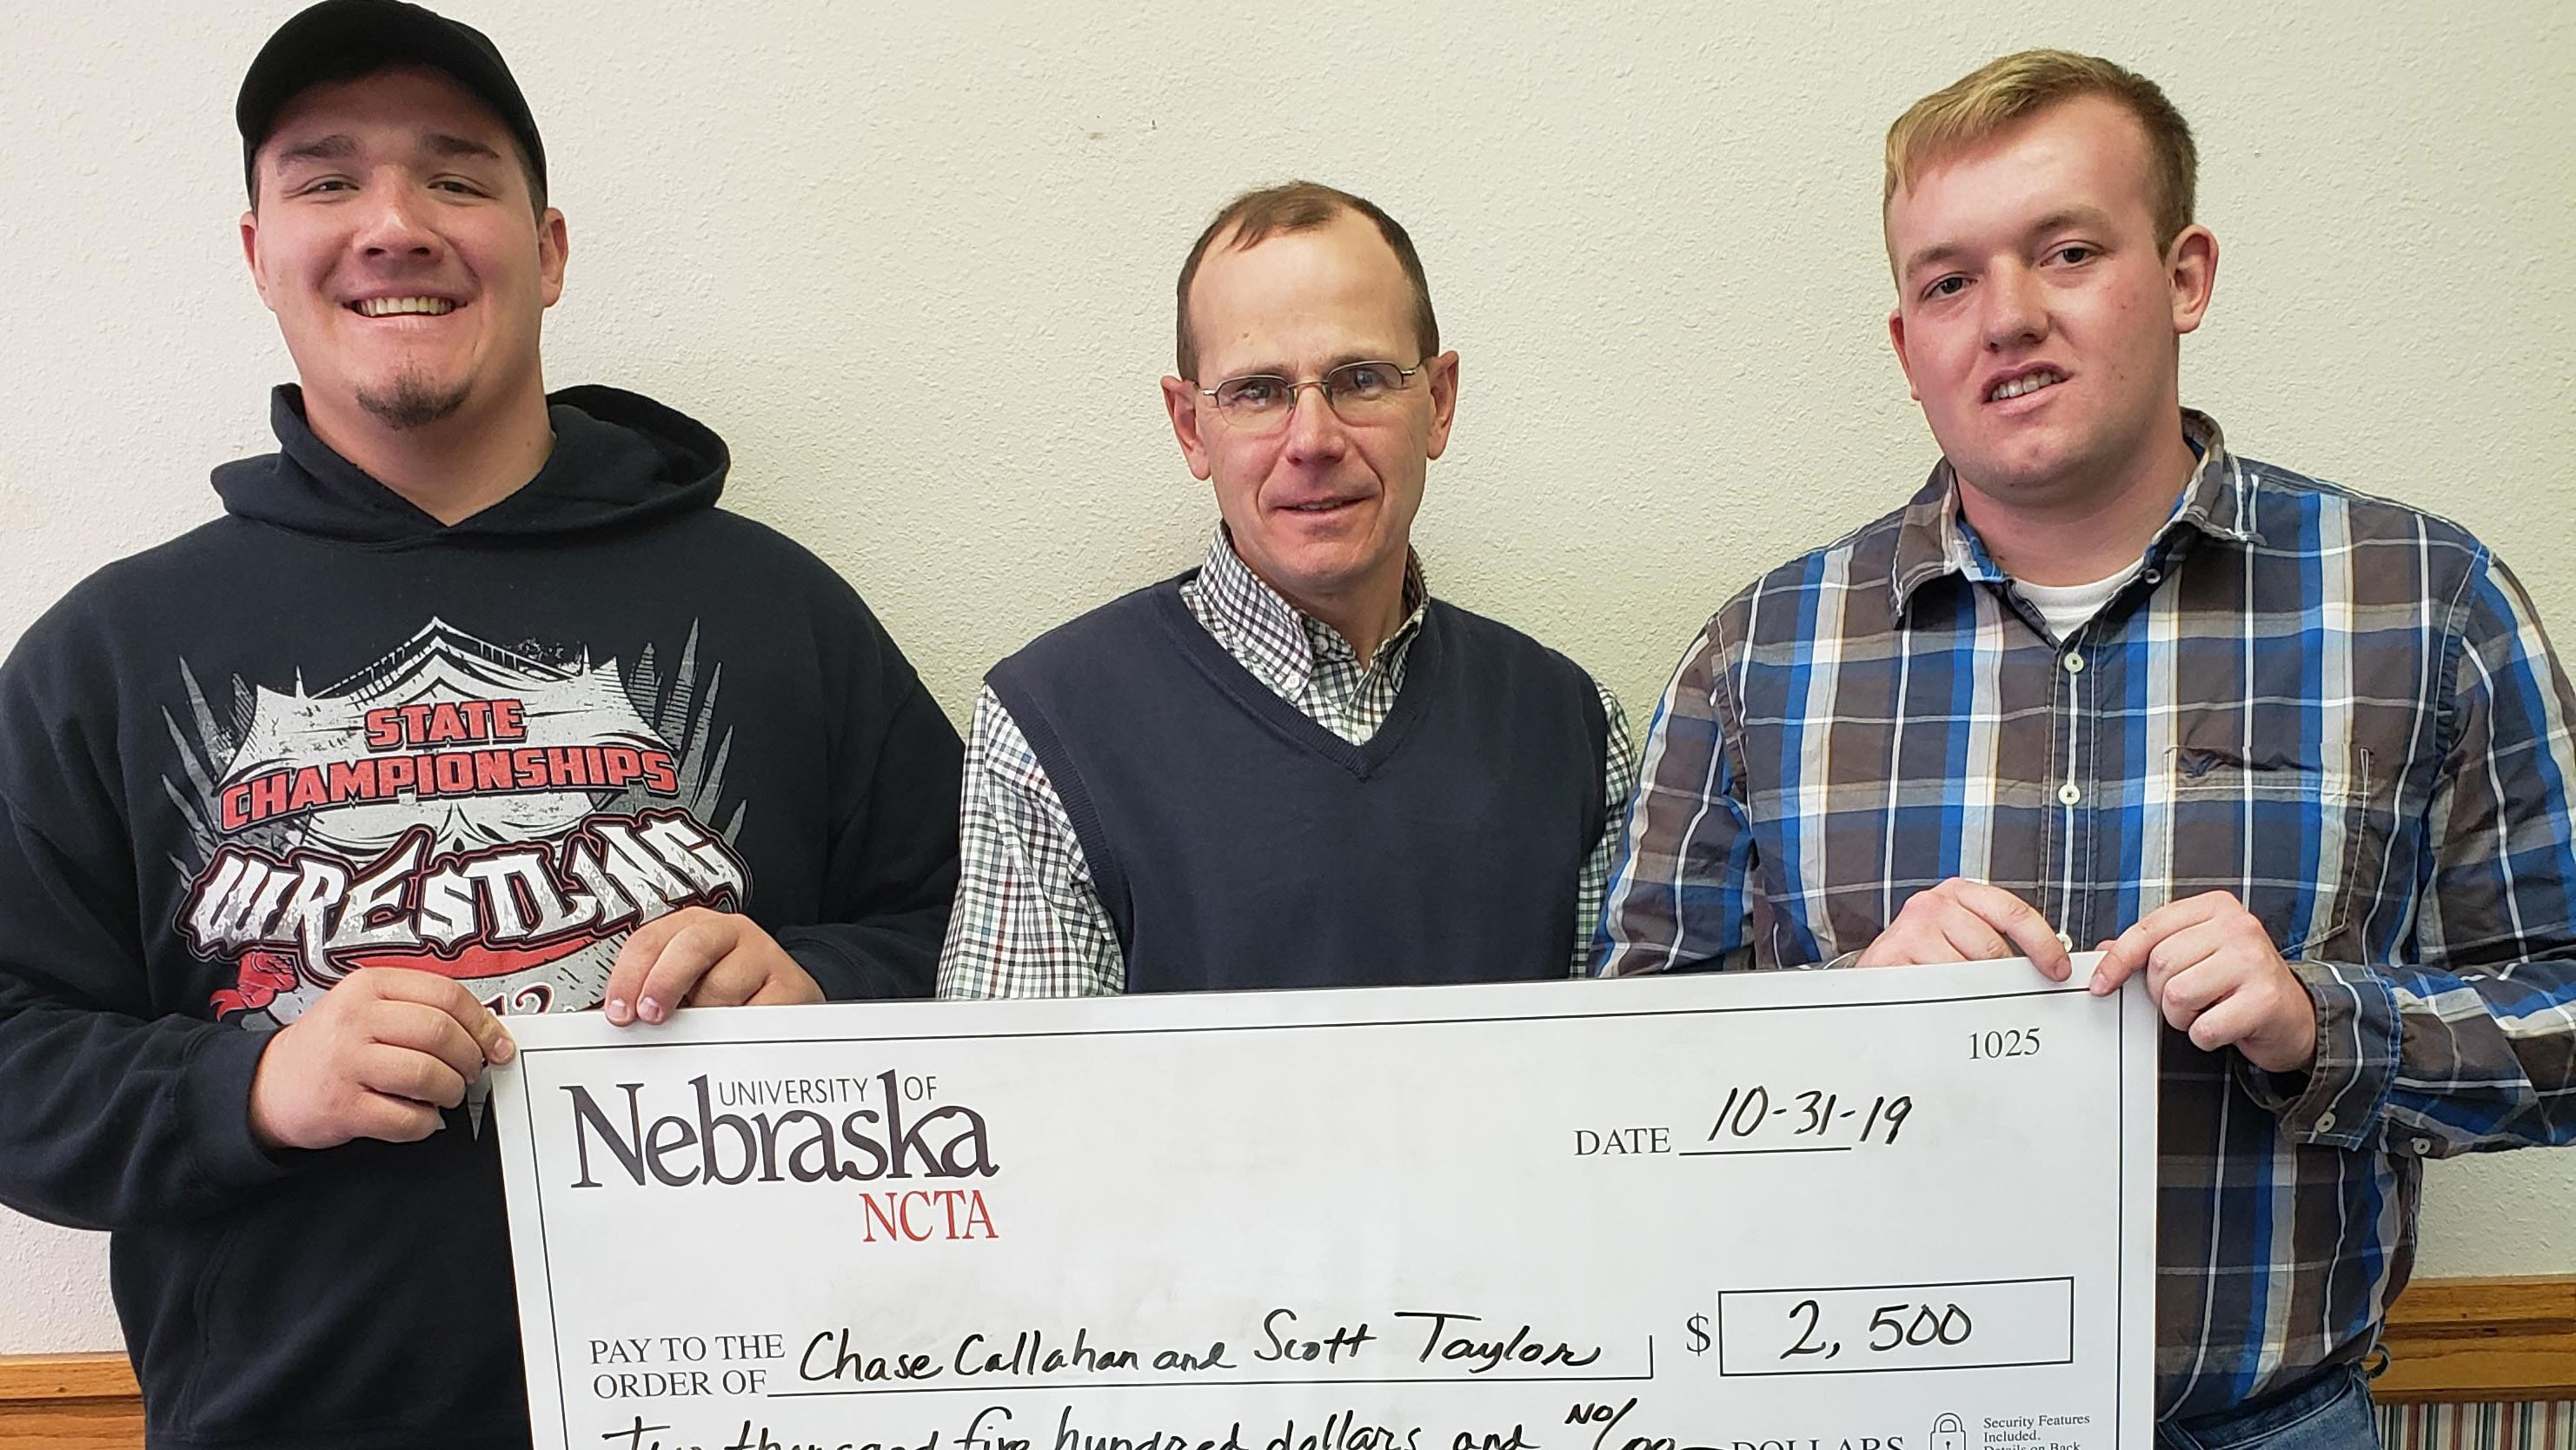 Scott Taylor of Curtis, left, and Chase Callahan of Farnam, right, each received a Sylvia Clawson/Hecht Scholarship presented last fall by NCTA Interim Dean Kelly Bruns. (NCTA photo)